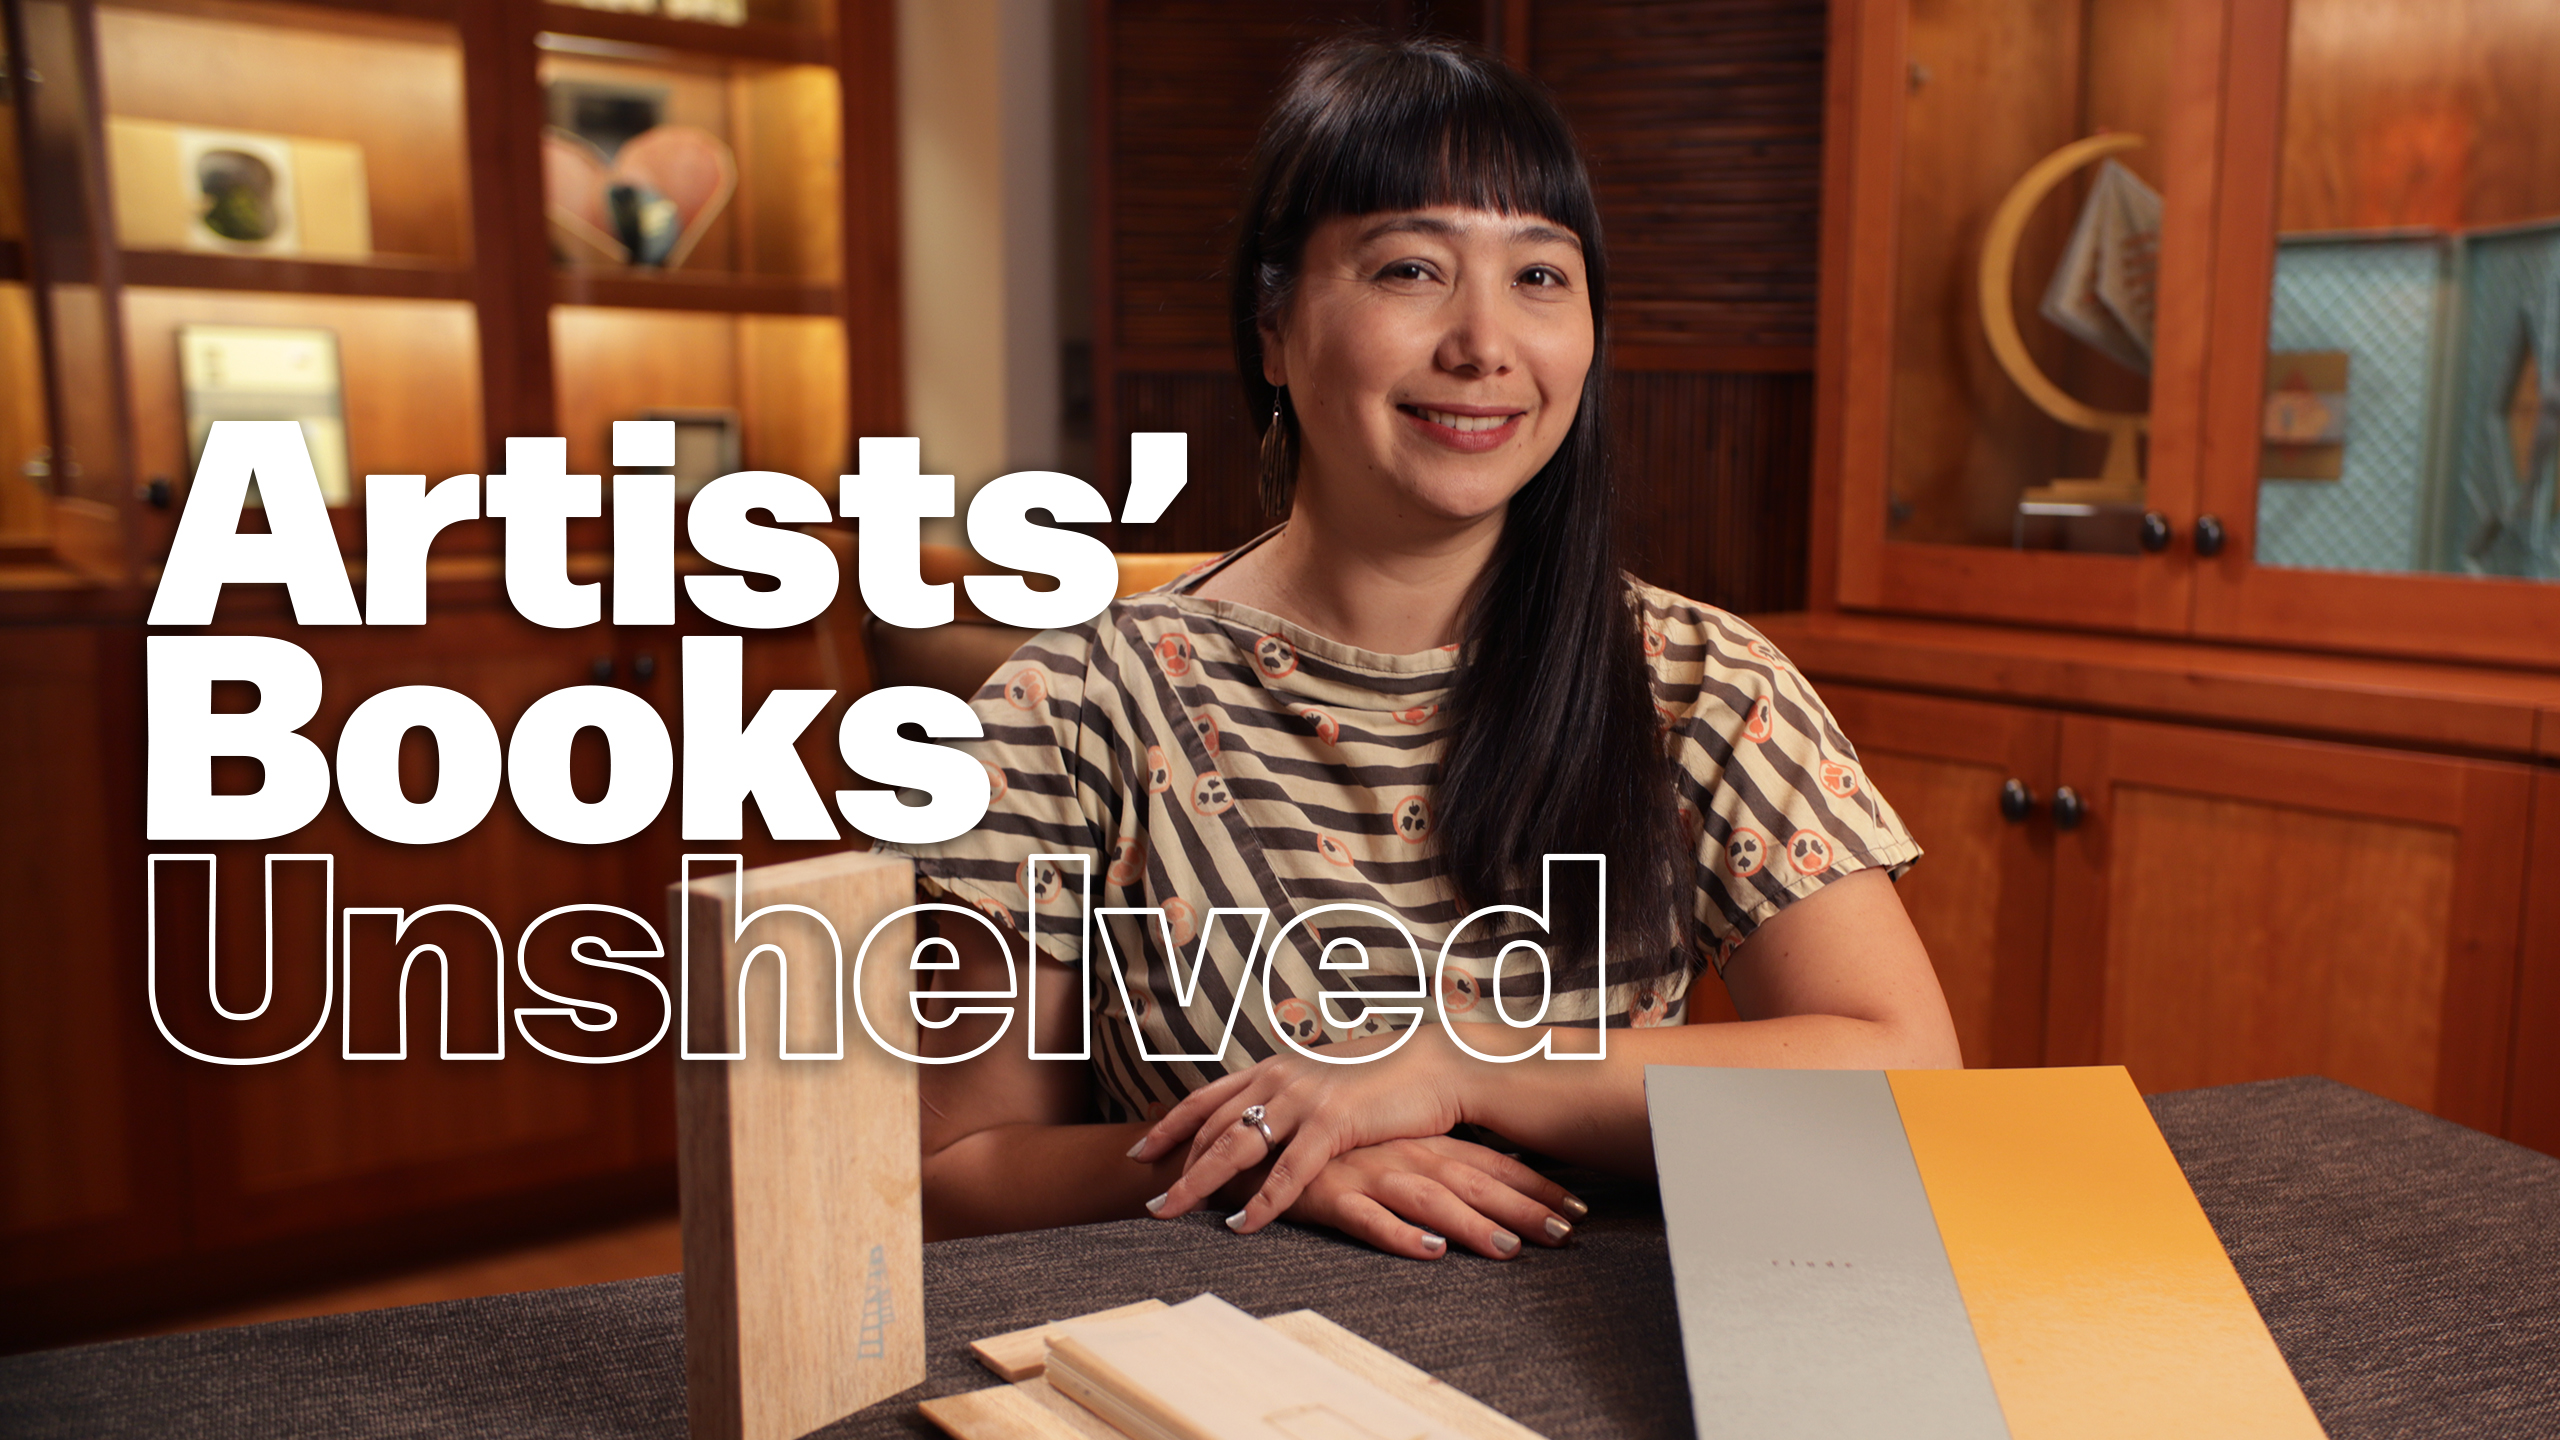 Artist and presenter Yuka Petz poses at a table with two artists' books in a warmly lit room with bookcases behind her